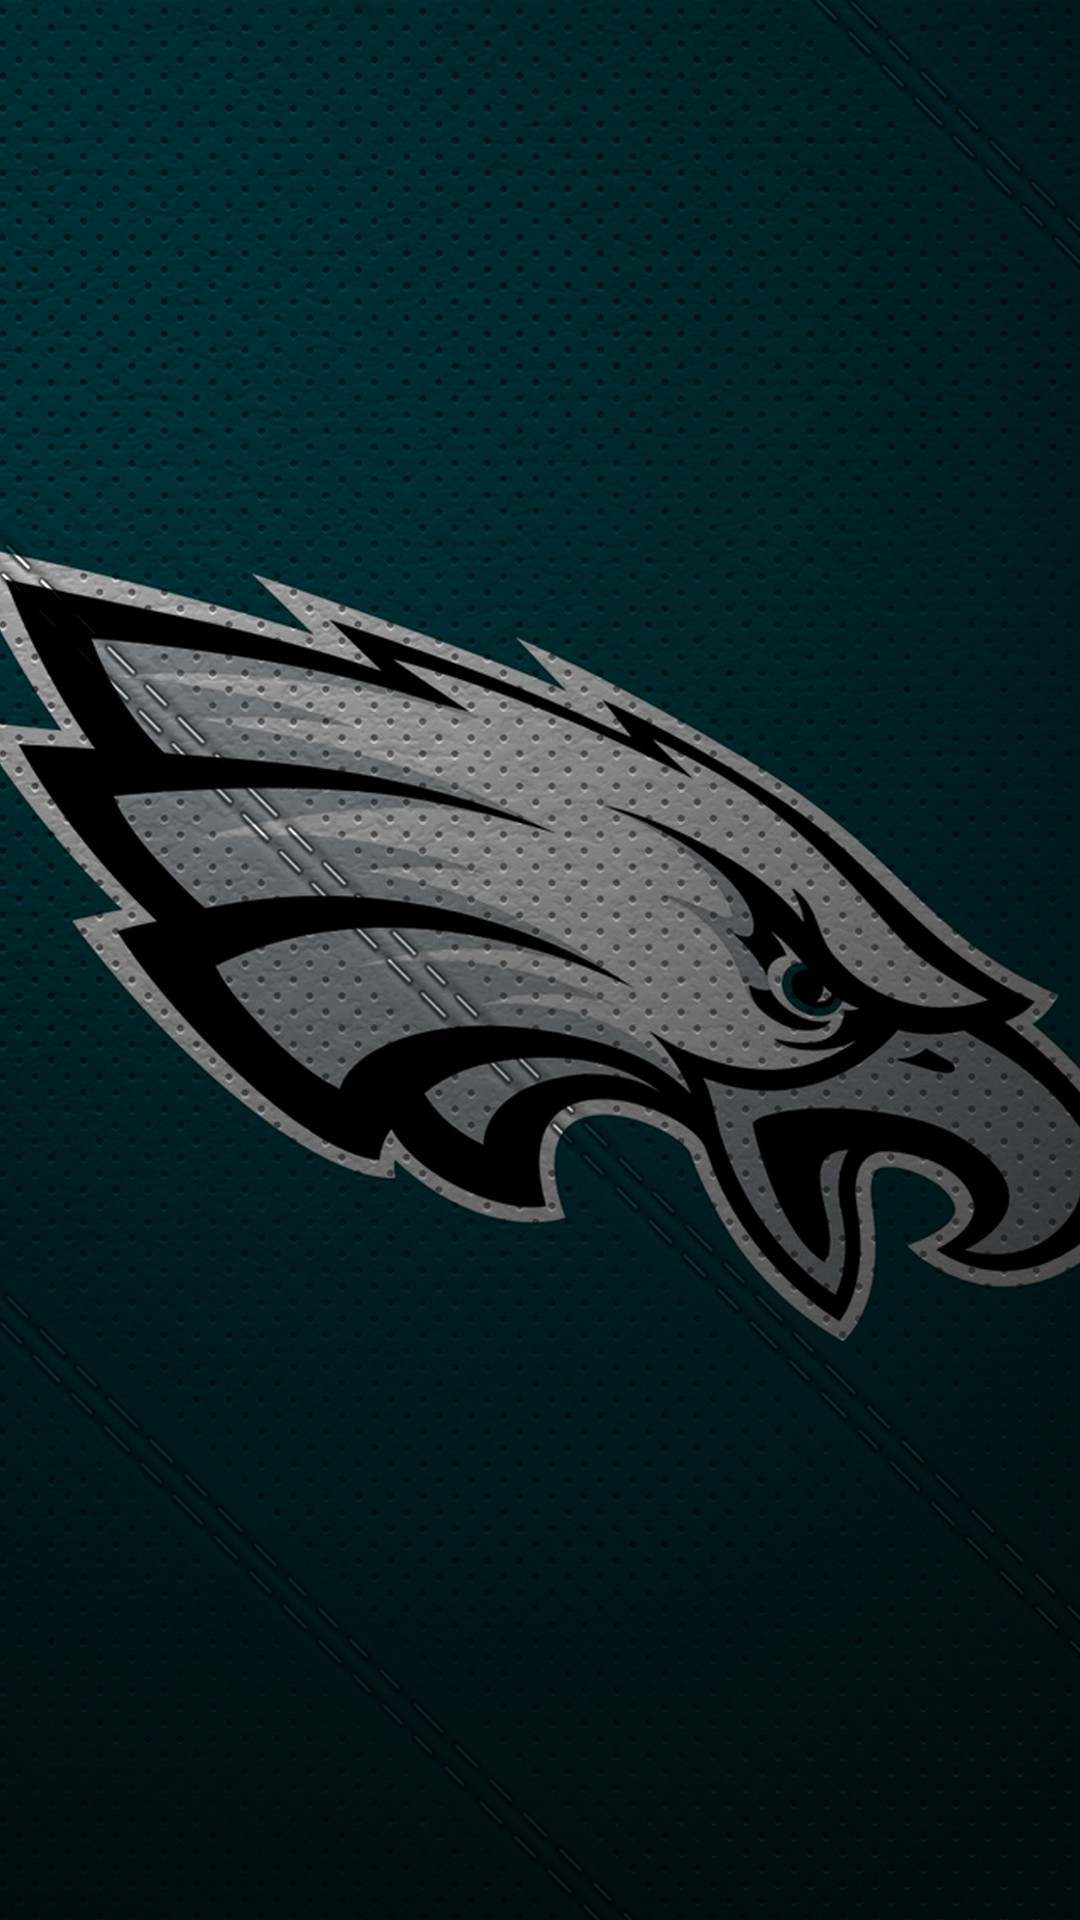 Eagles iPhone 8 Wallpaper With Resolution 1080X1920 pixel. You can make this wallpaper for your Mac or Windows Desktop Background, iPhone, Android or Tablet and another Smartphone device for free